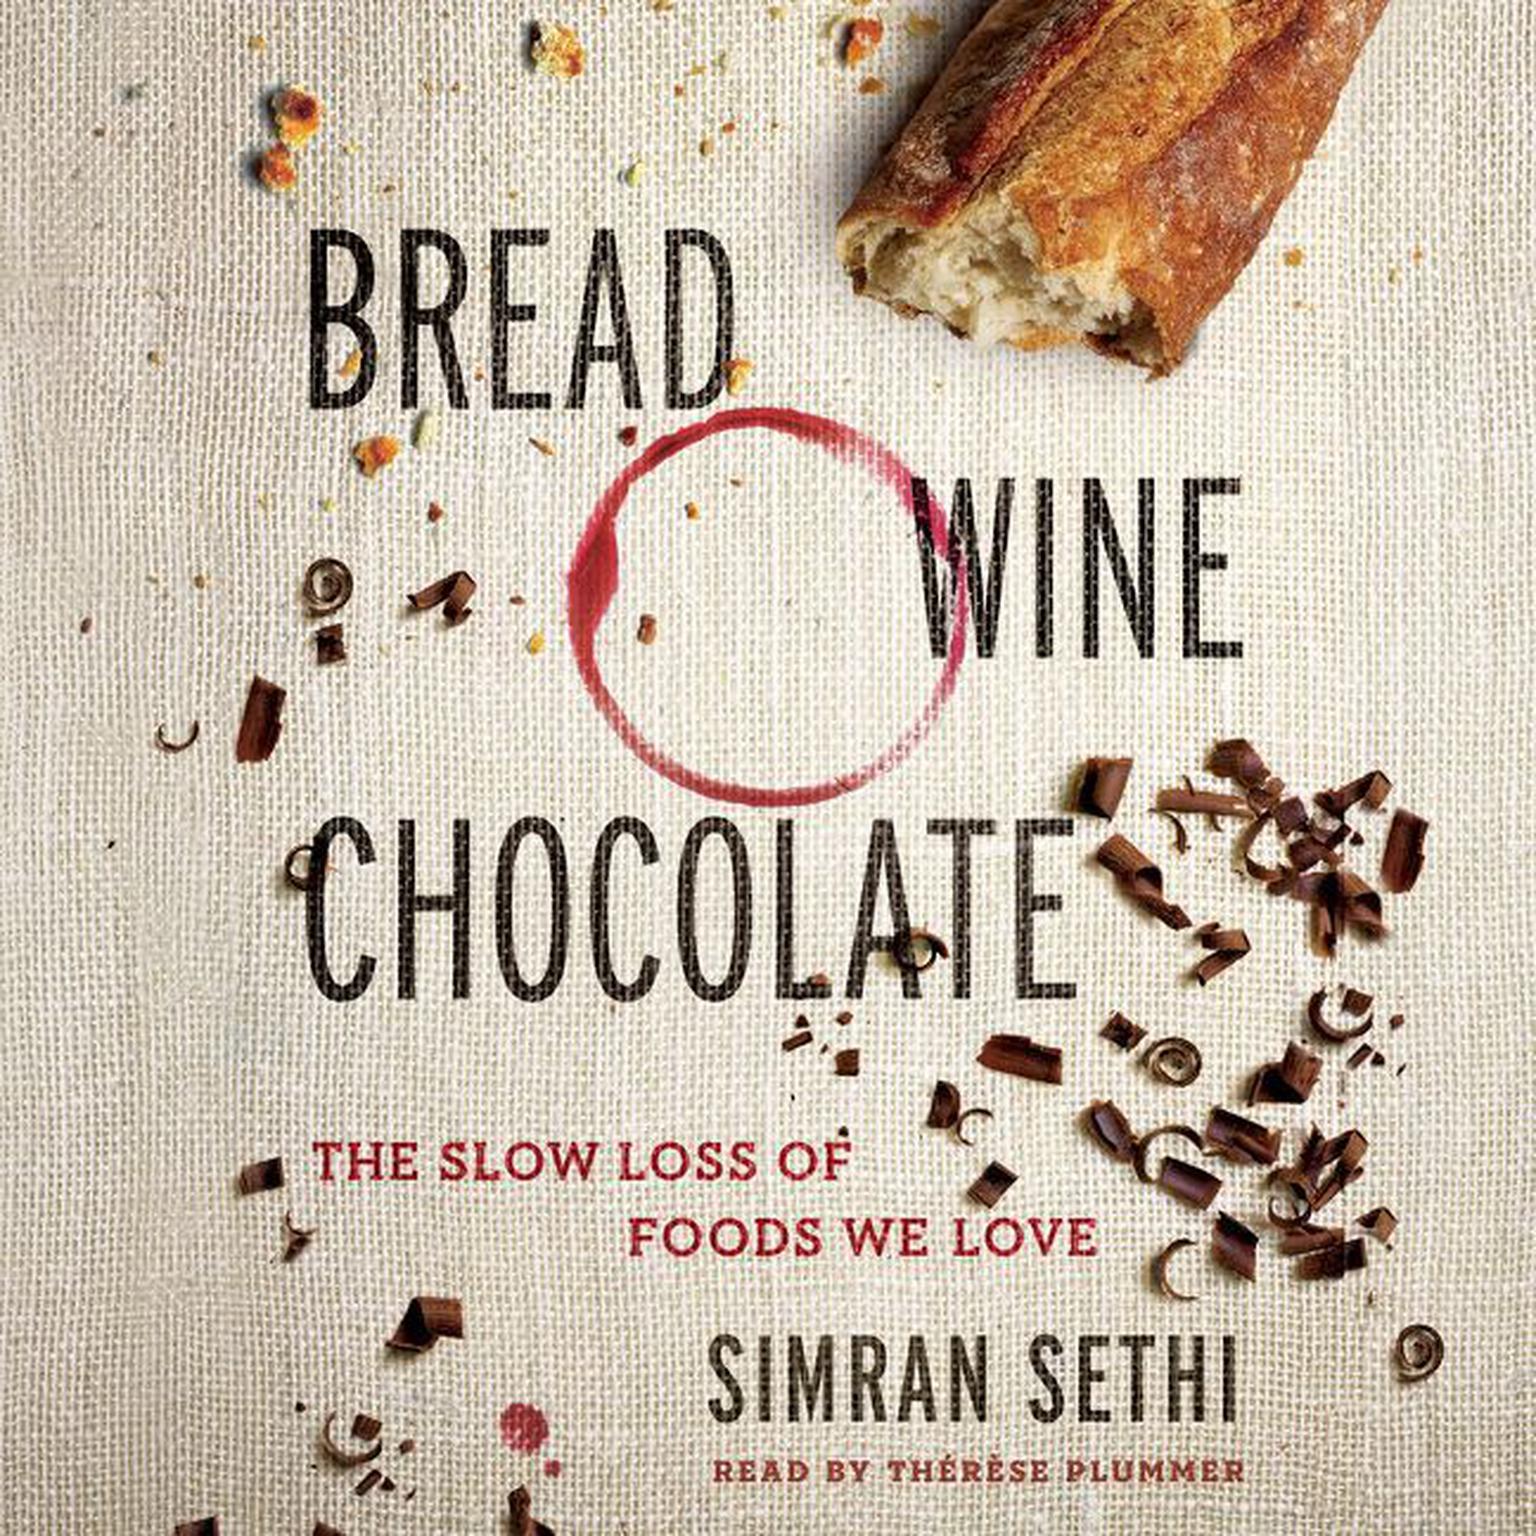 Bread, Wine, Chocolate: The Slow Loss of Foods We Love Audiobook, by Simran Sethi